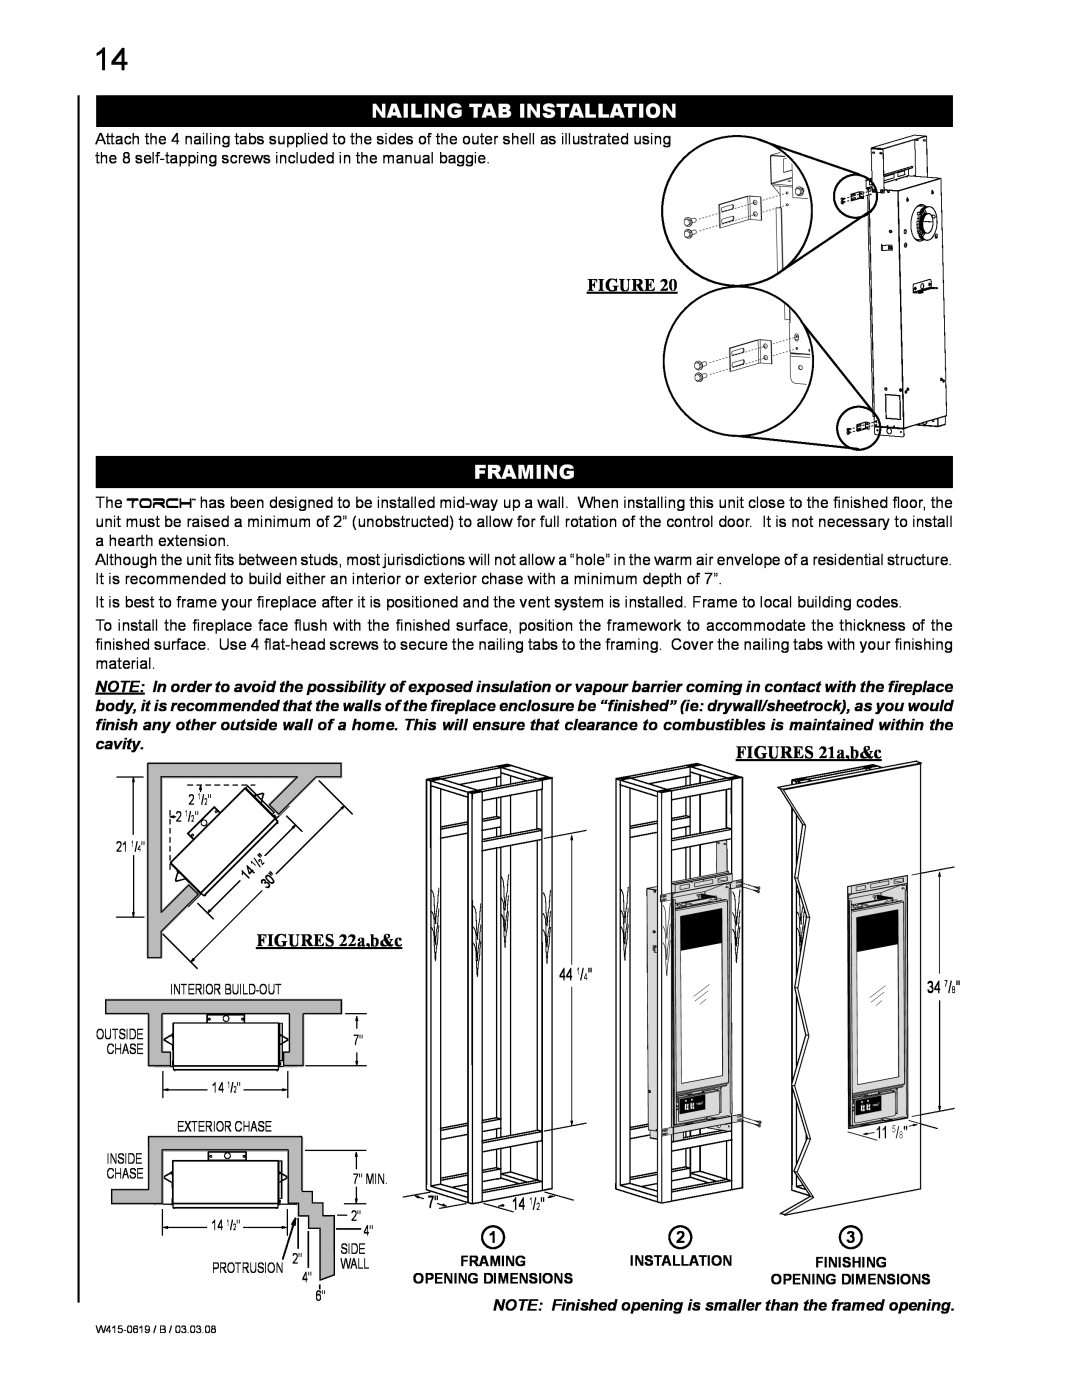 Napoleon Fireplaces GT8N, Fireplace, GT8P manual Nailing Tab Installation, Framing, FIGURES 22a,b&c, 34 7/8, 11 5/8, 14 1/2 